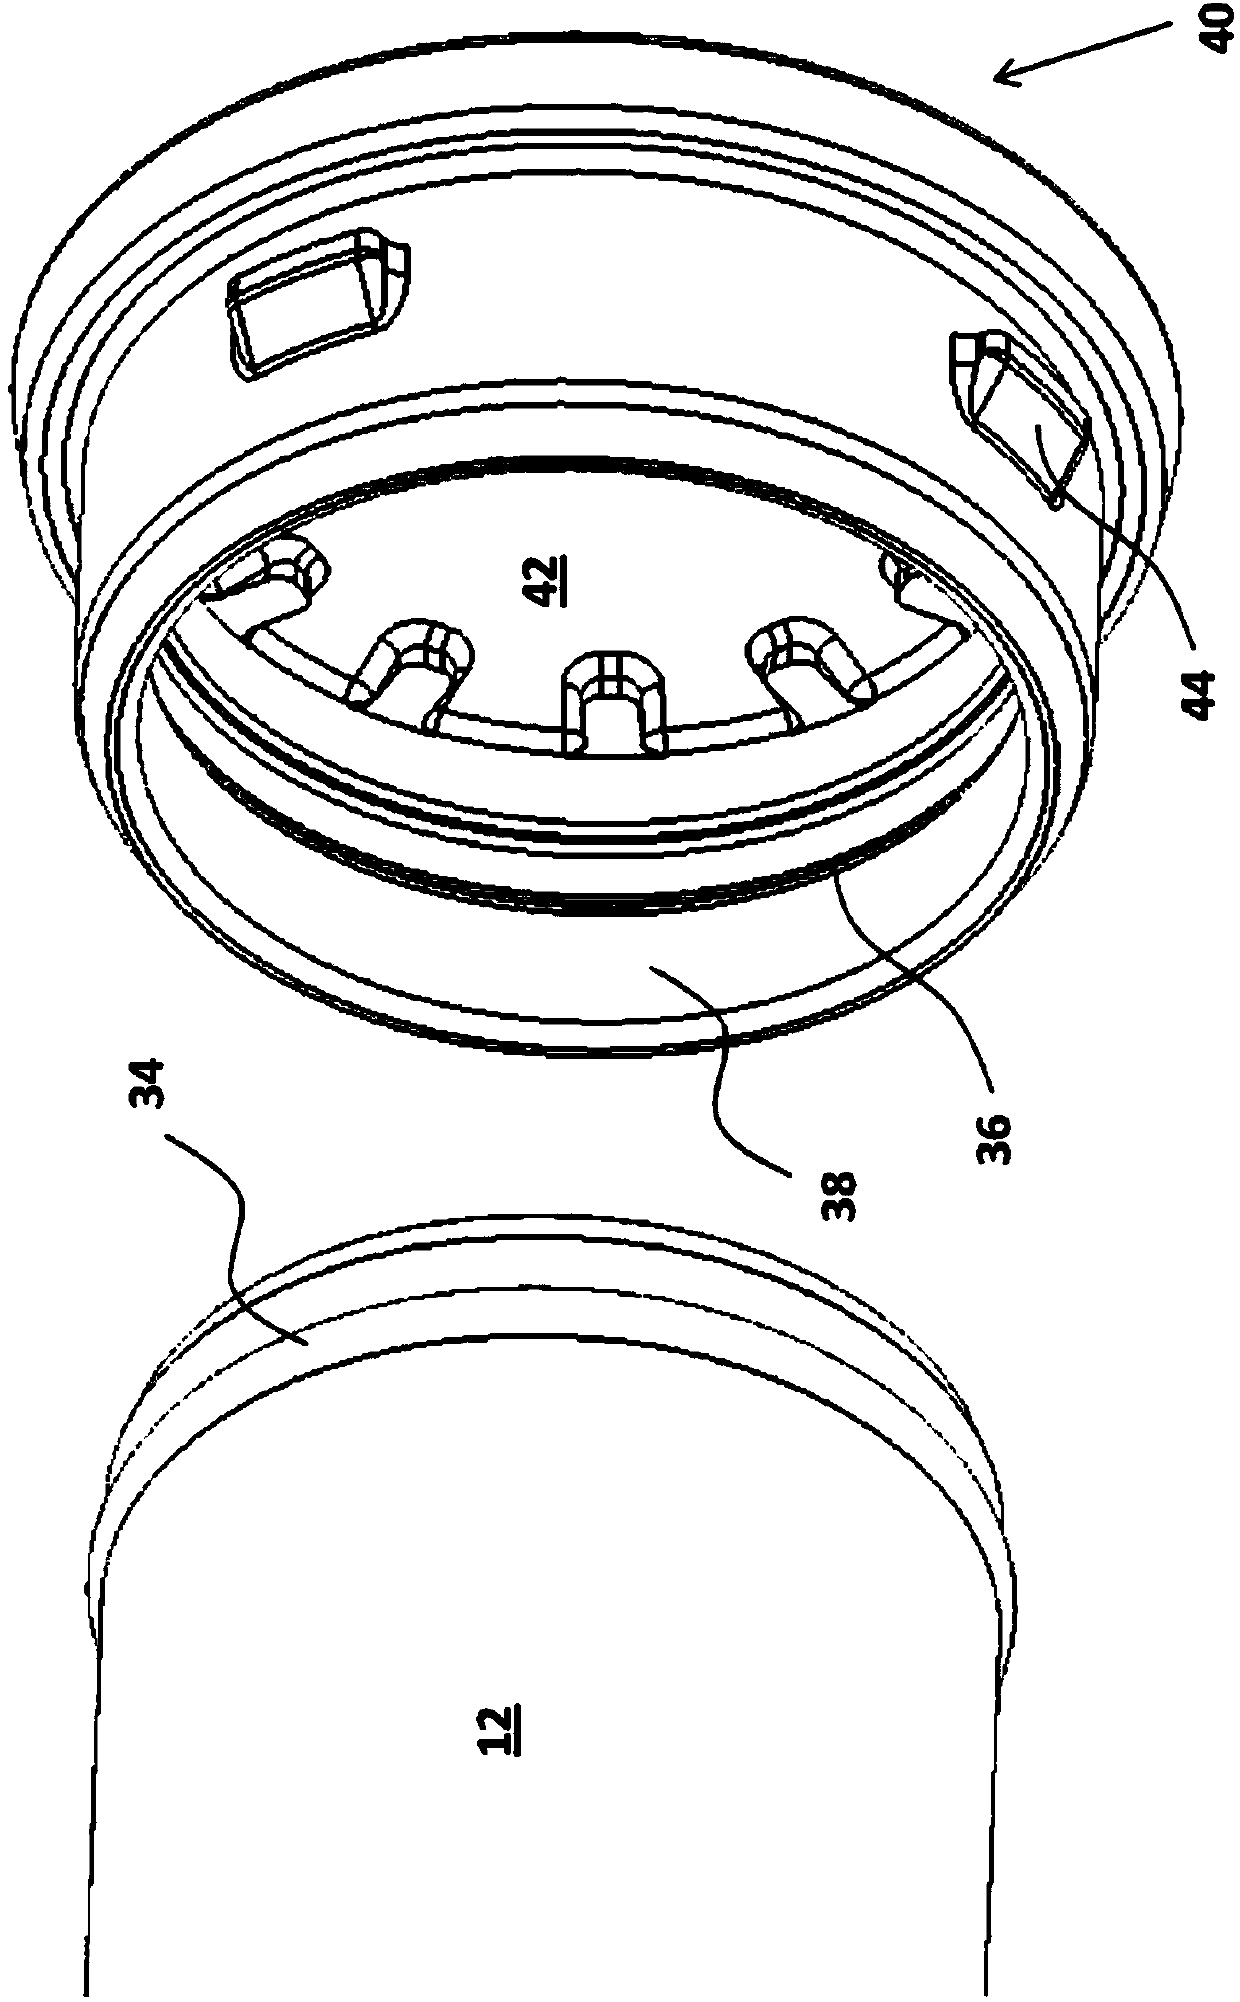 Device for removing delivery member shields